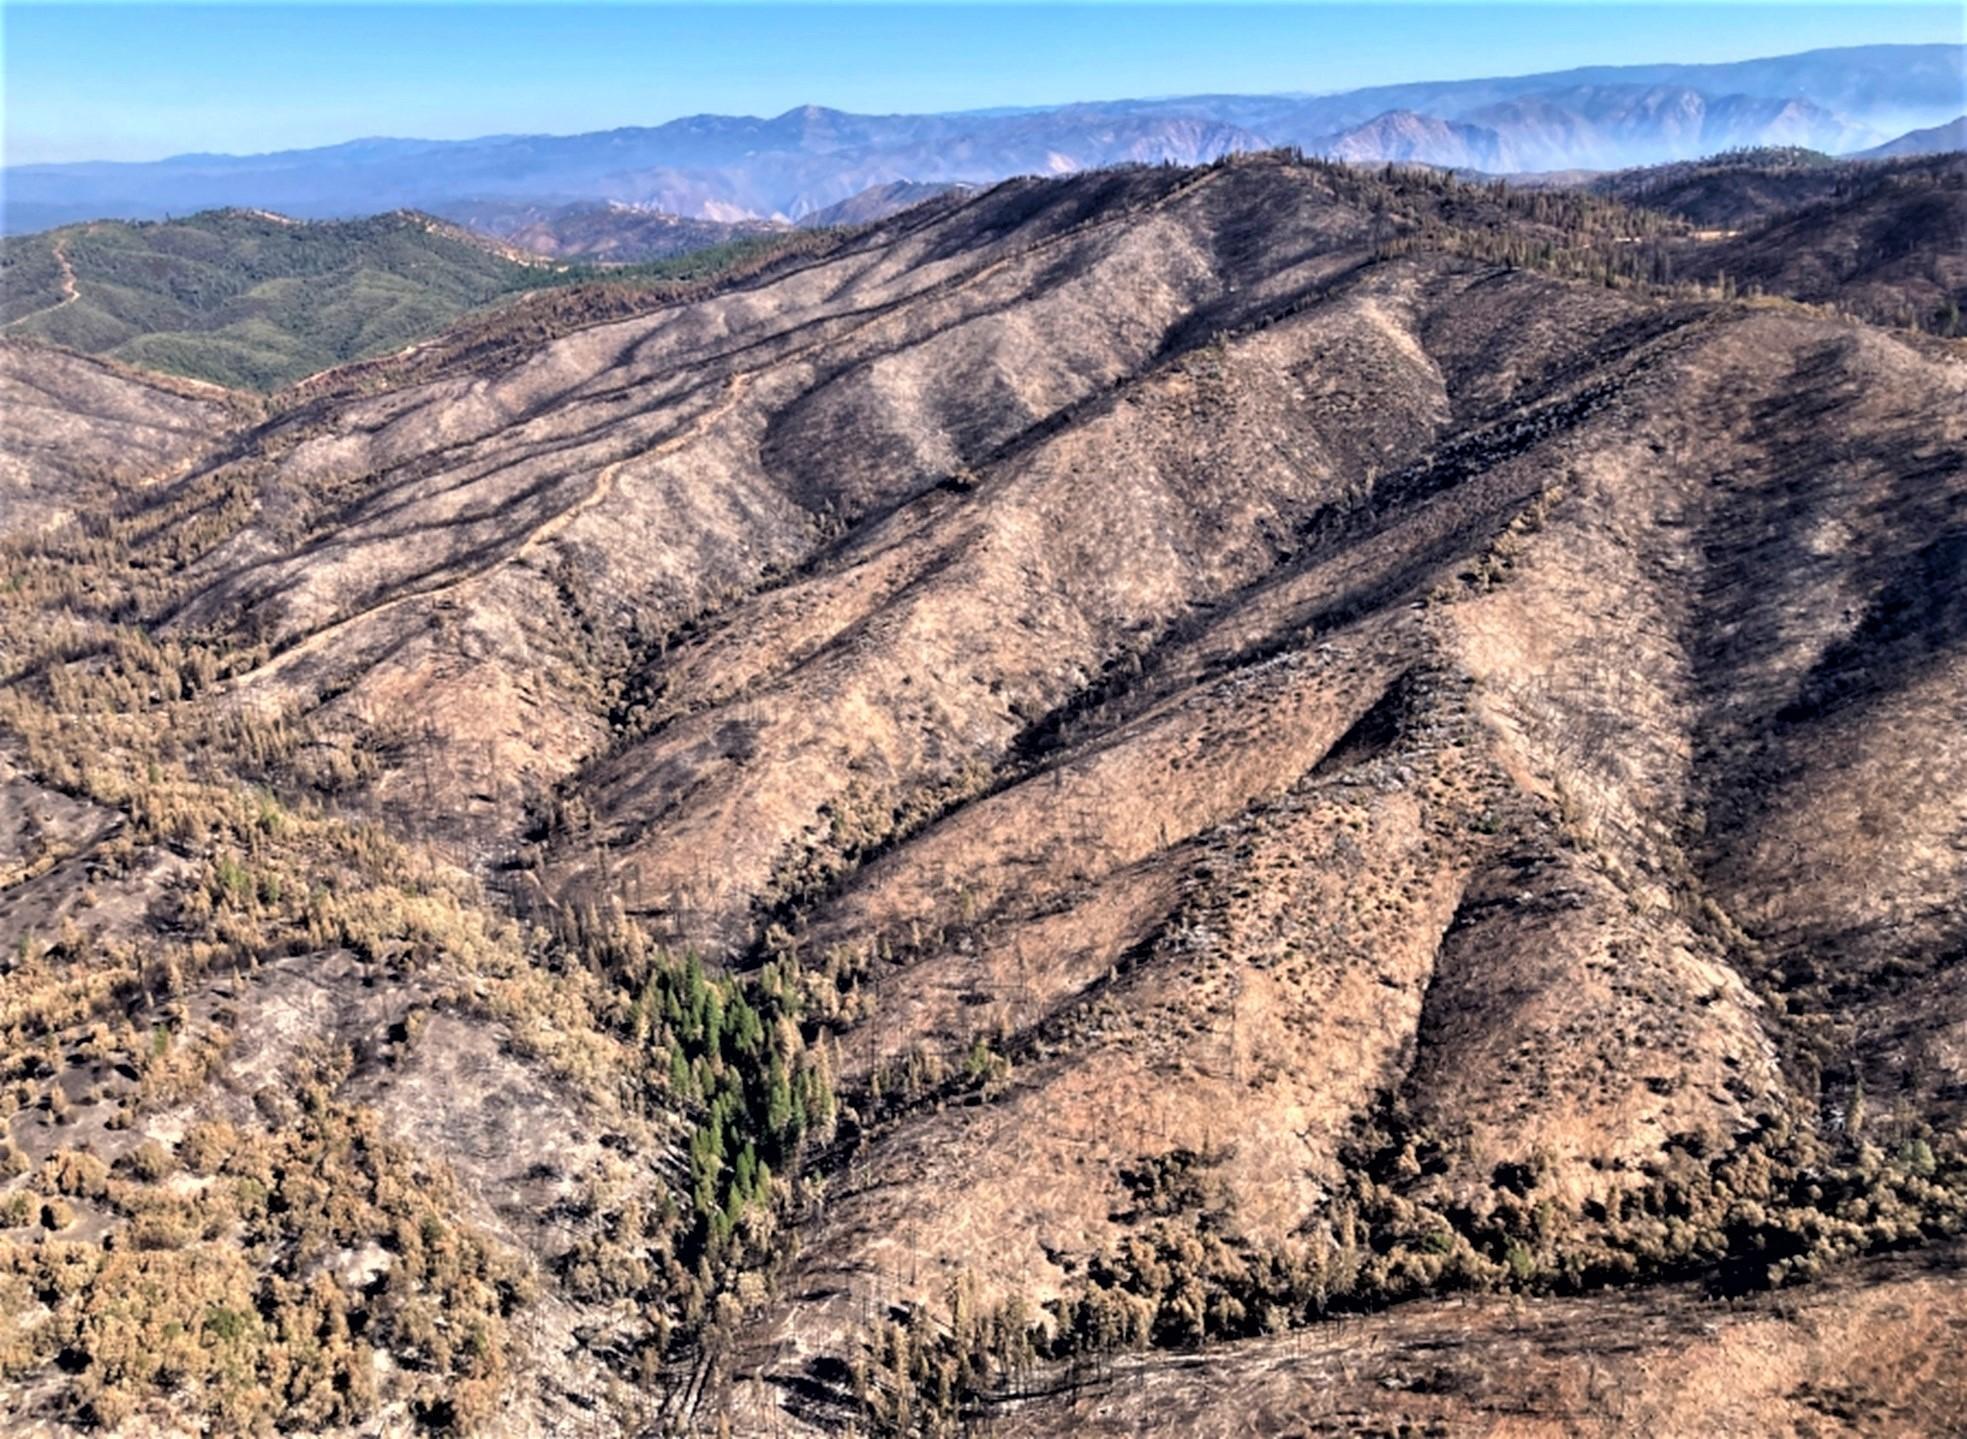 Image showing an aerial view of a portion of the Oak burned area